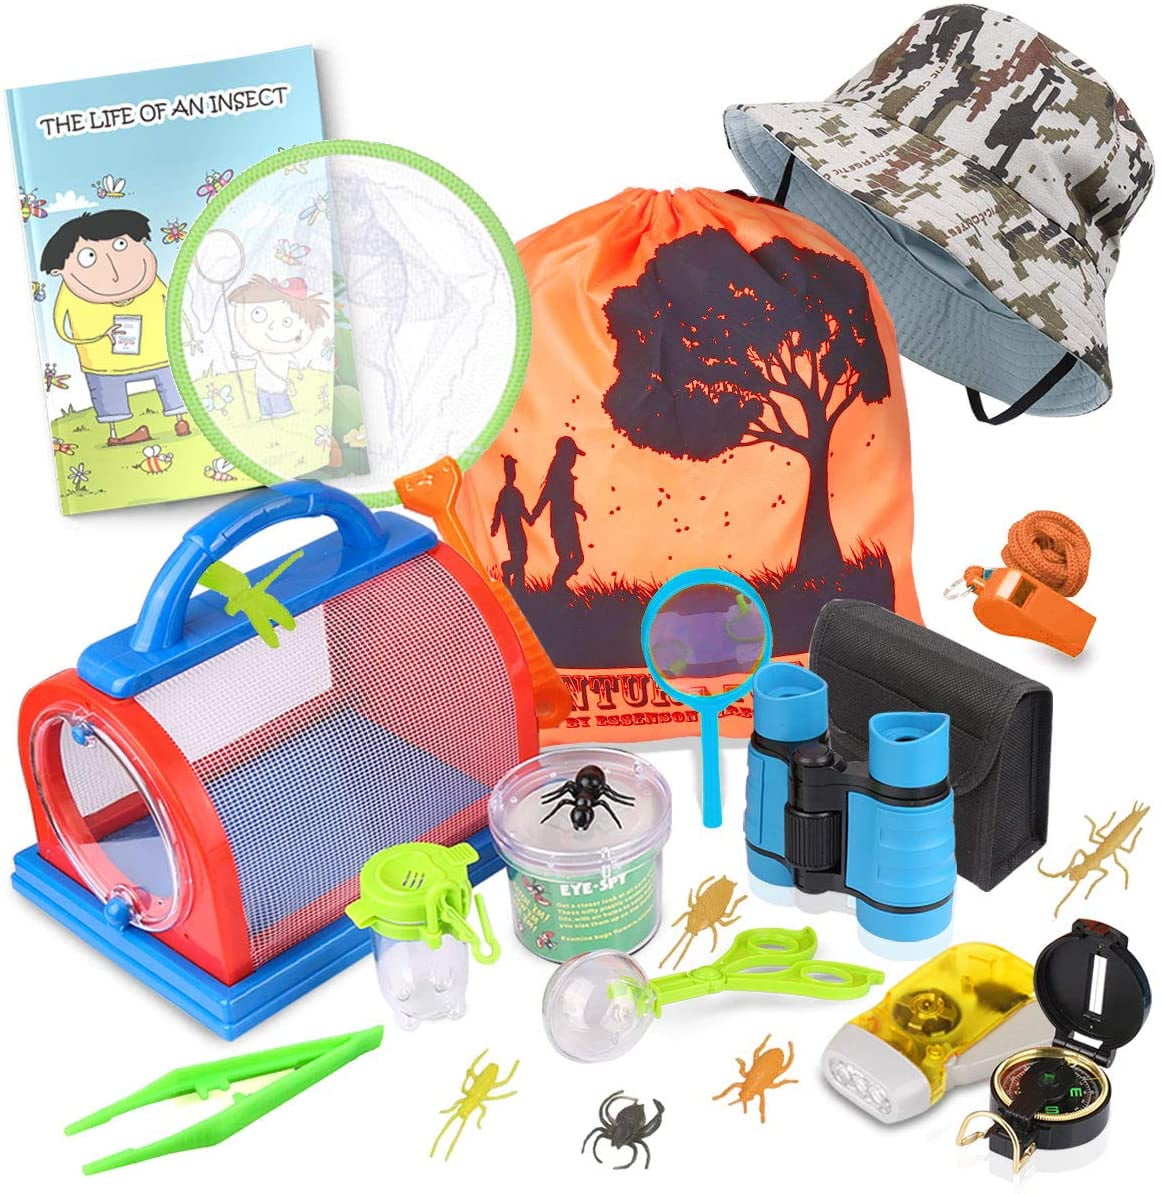 Bug Collection and Kids Explorer Kit Includes Butterfly Net RESTCLOUD Educational Bug Catcher Kit for Kids Science Toy for Boys and Girls Bug Observation Capsule and Magnifying Glass 